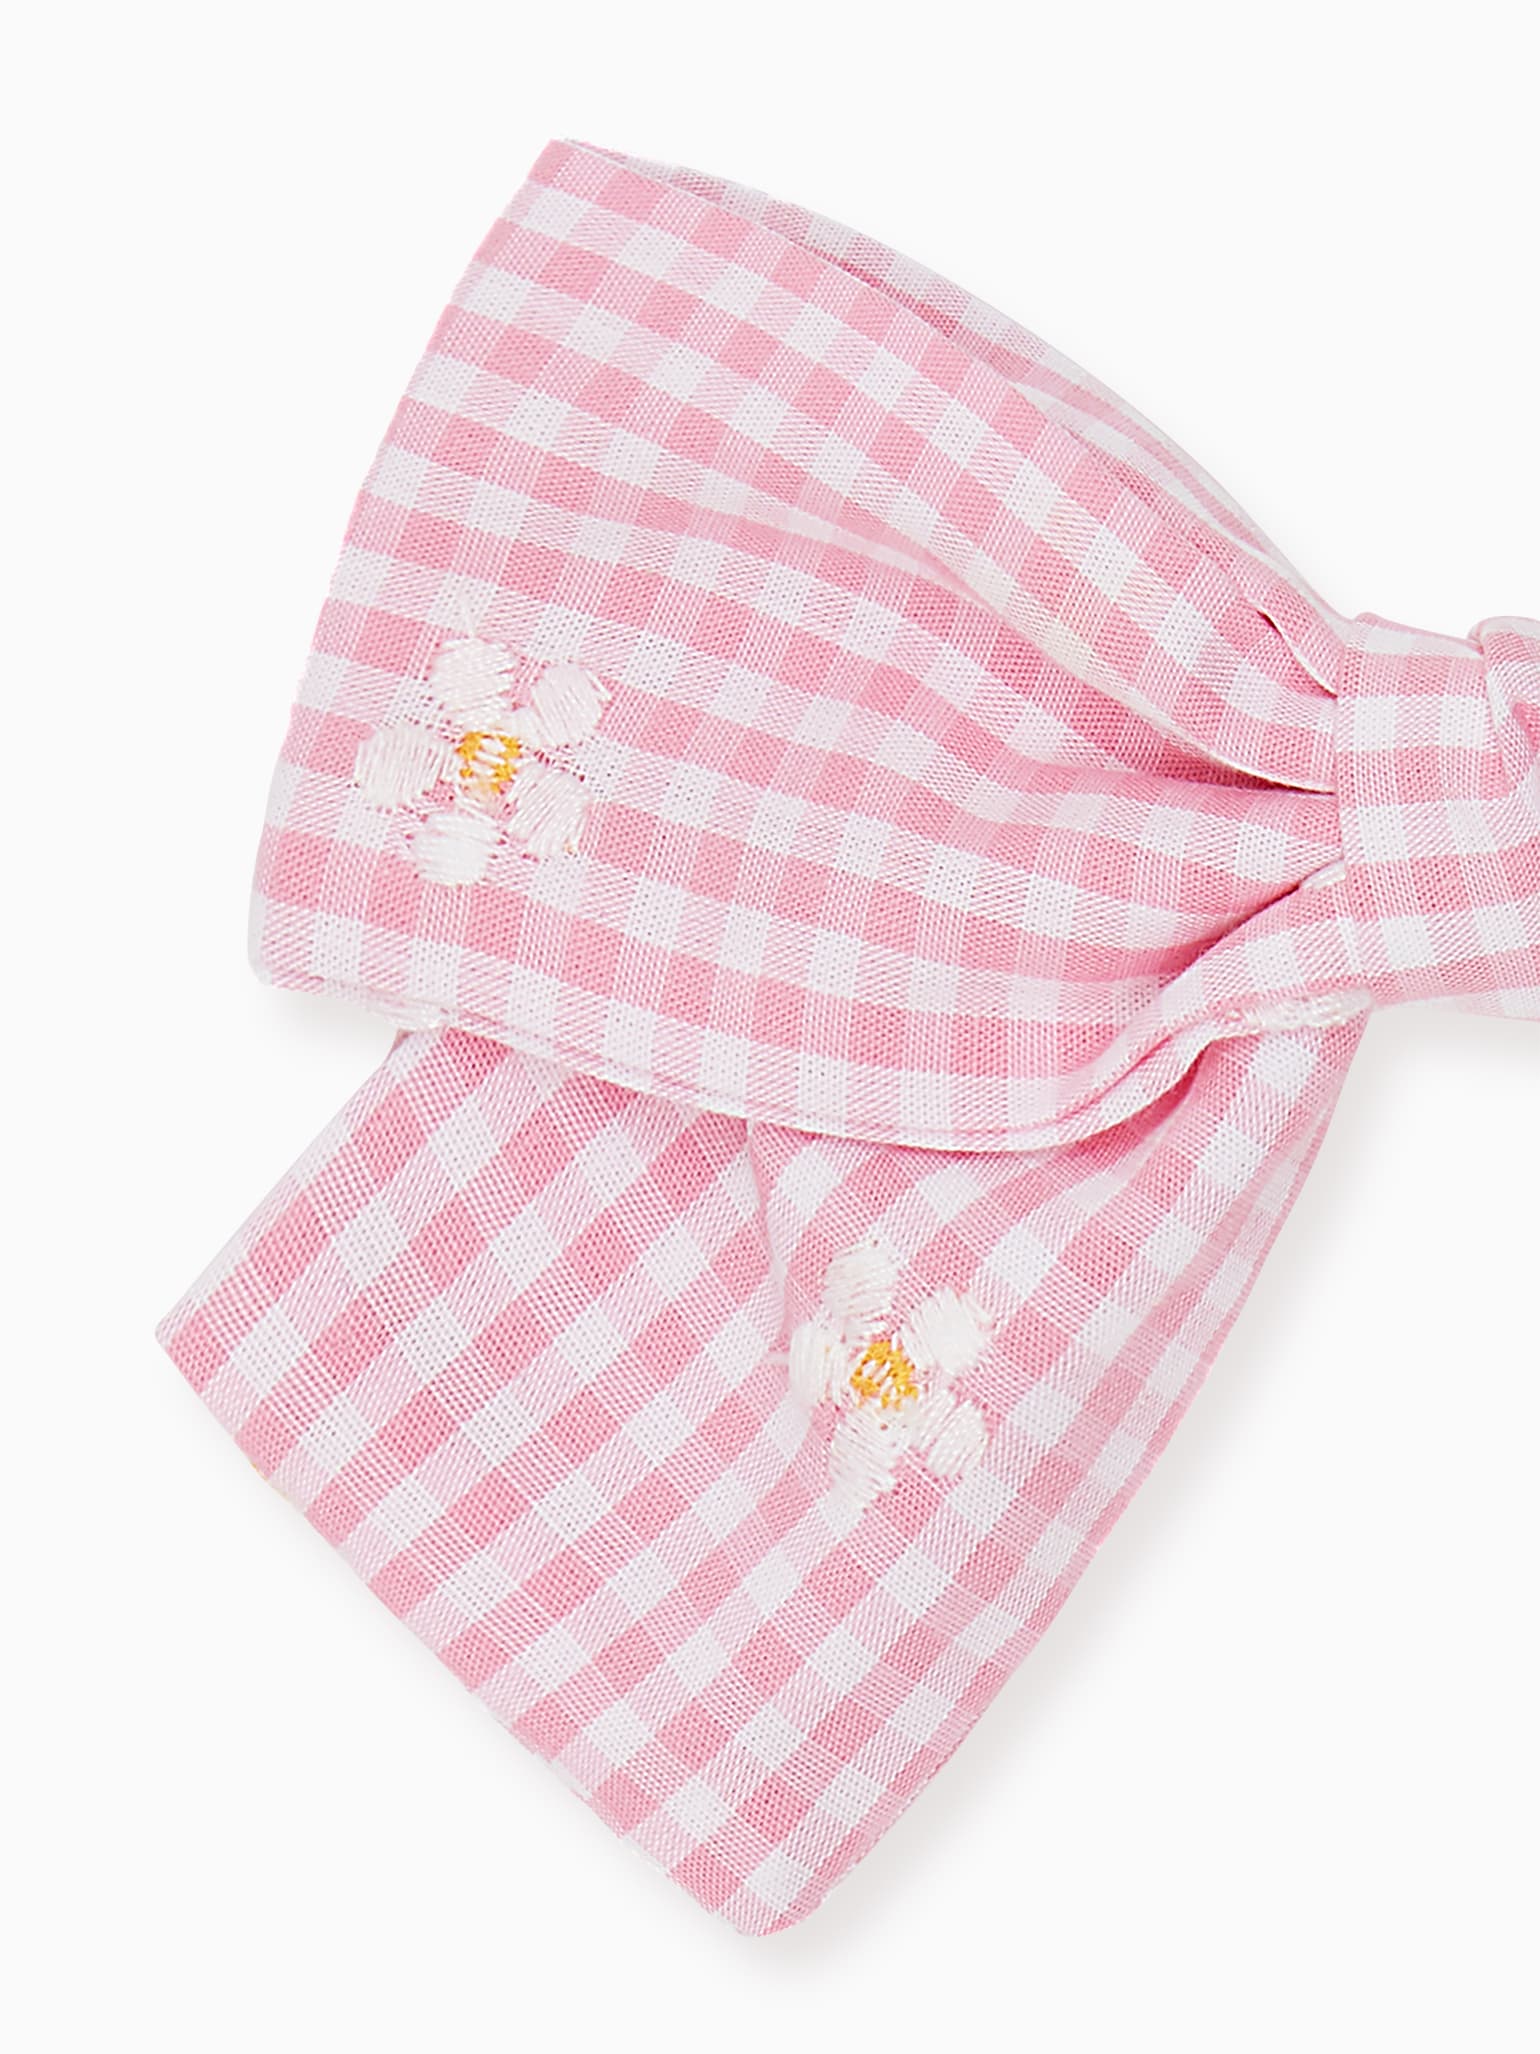 Pink Gingham Large Bow Girl Clip